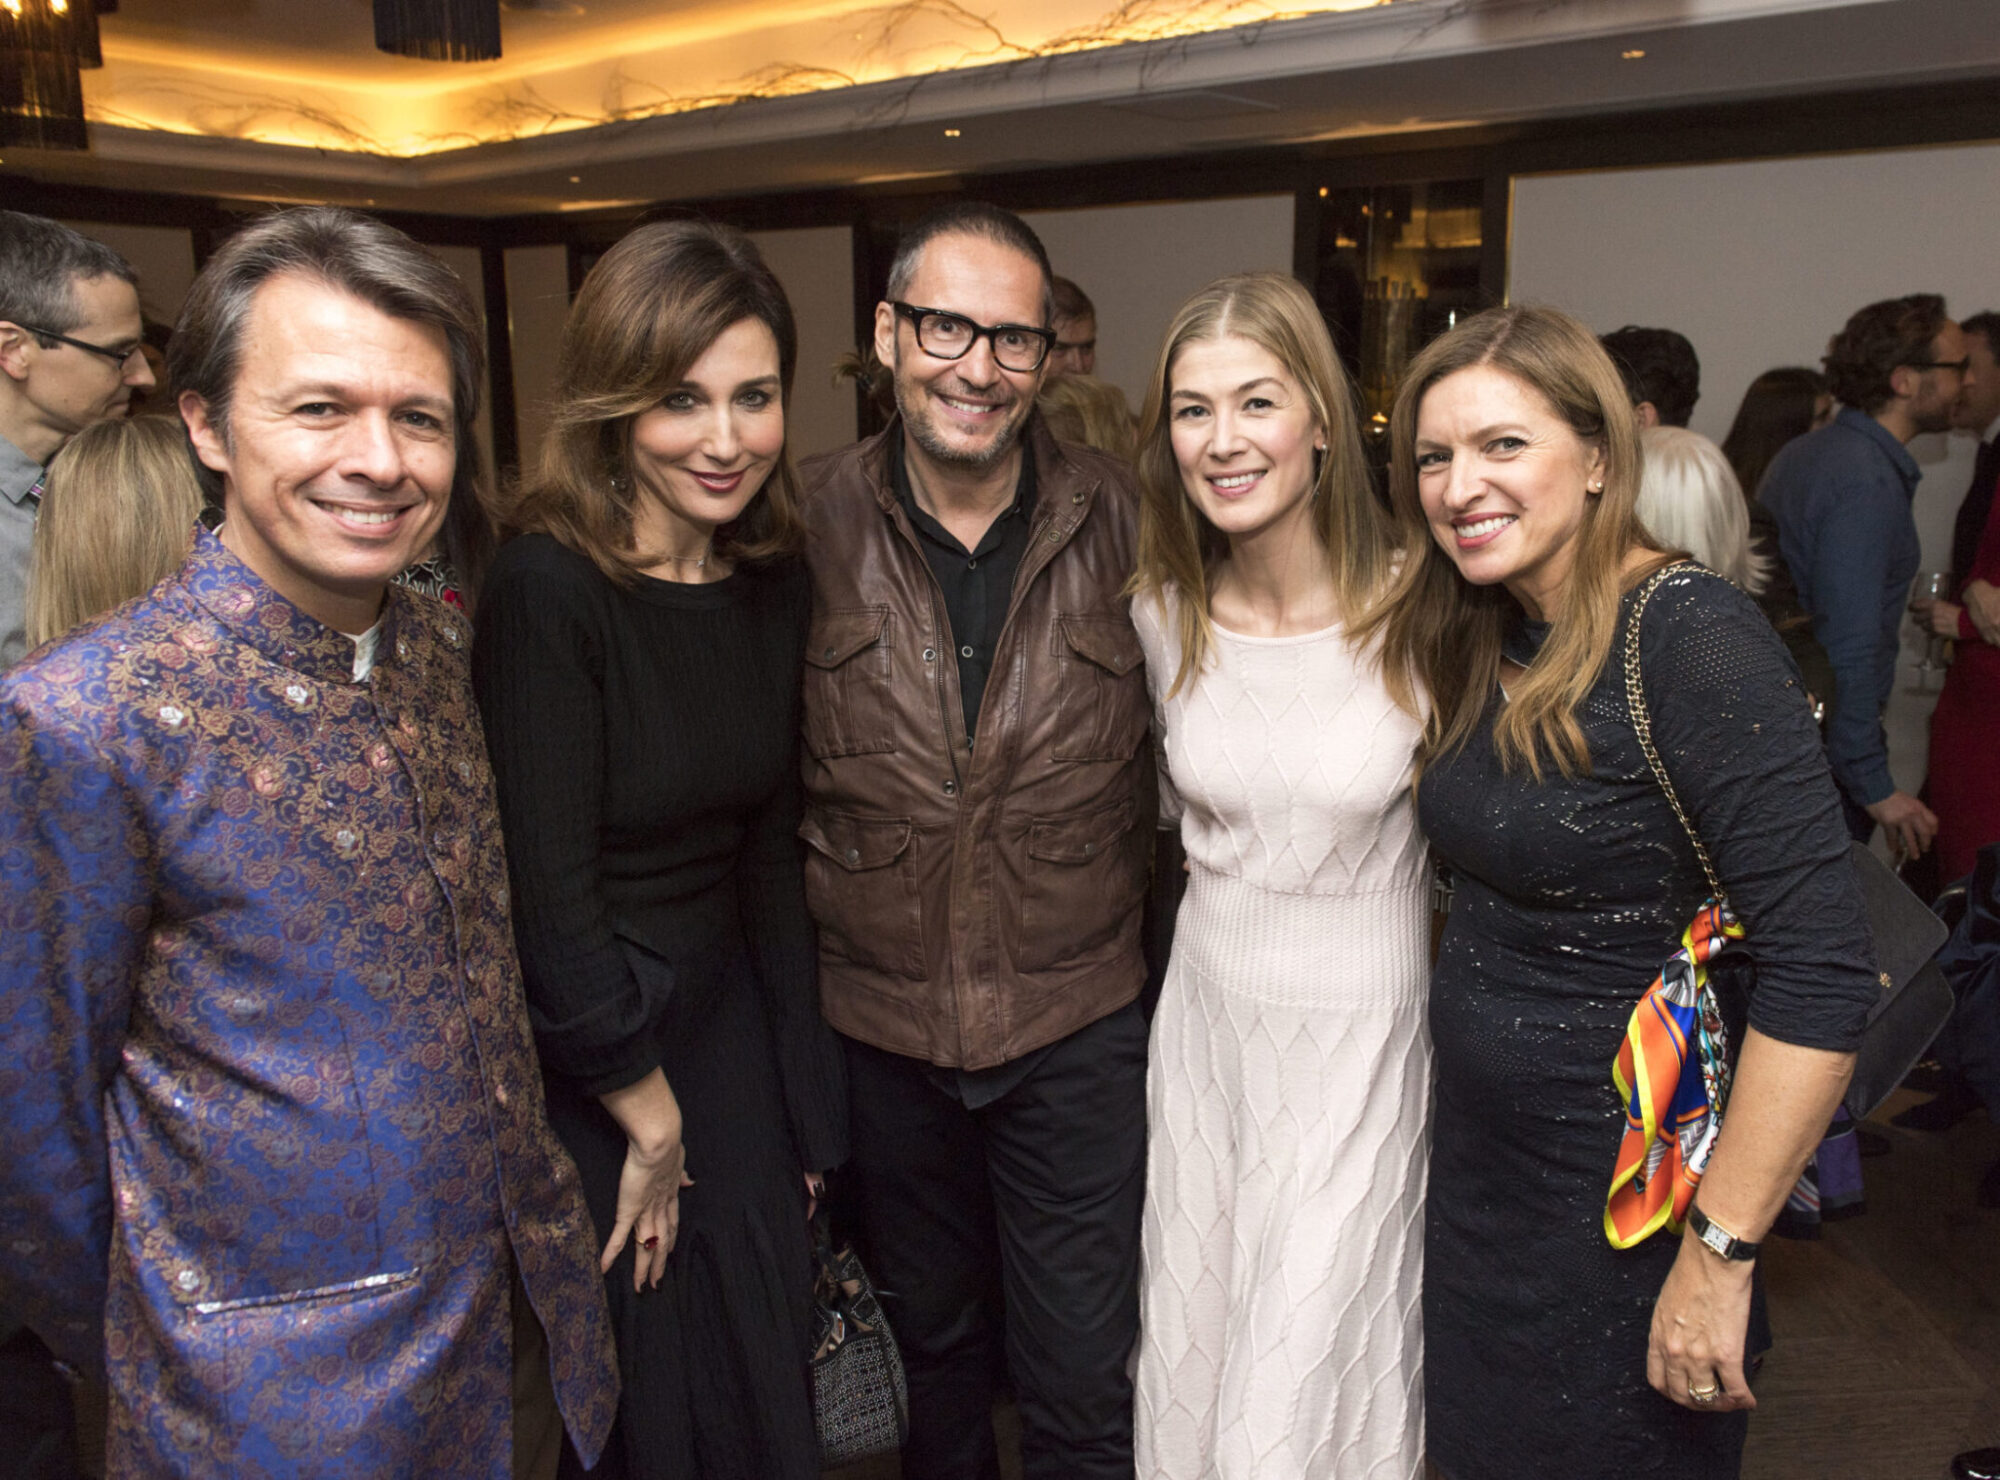 WITH FRENCH ACTRESSES ELZA ZYLBERSTEIN (A PERSONAL FRIEND) AND ROSAMUND PIKE